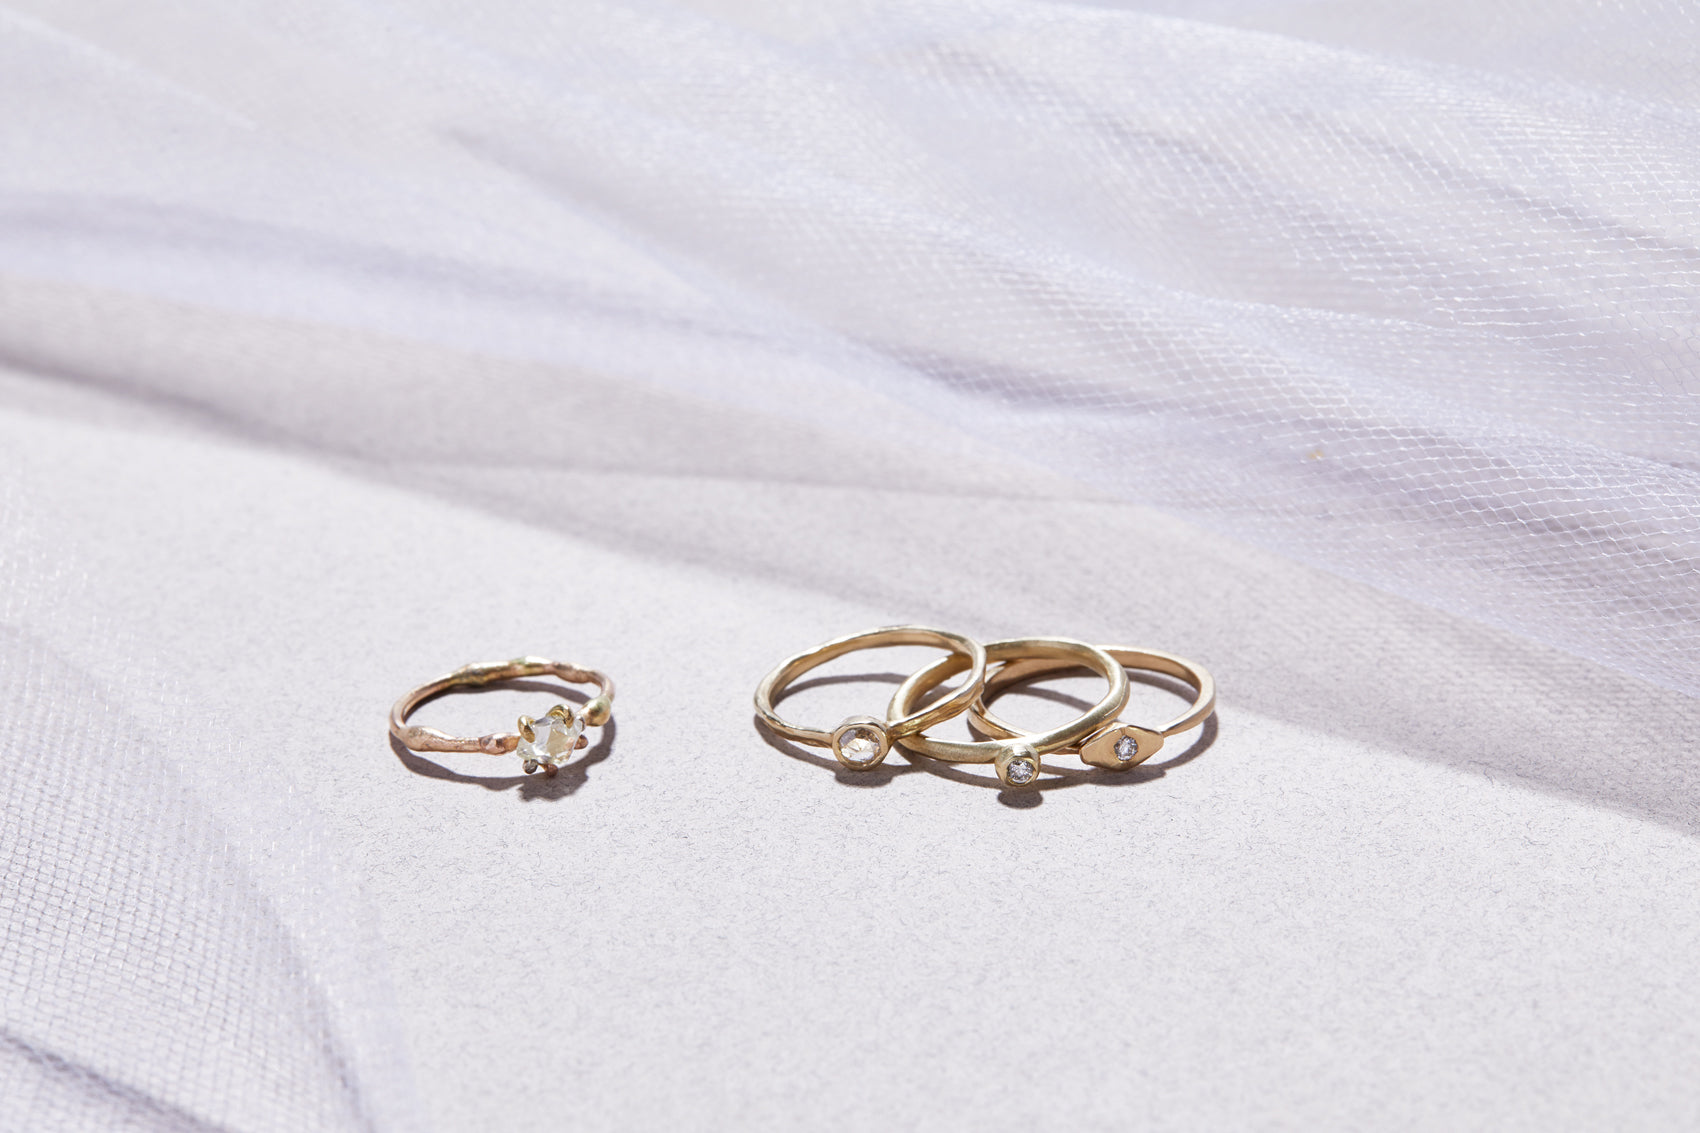 The delicate Slope Ring is an elegant band with a flush set 0.04 tcw diamond on an organic hammered 14k gold band.The delicate Slope Ring is an elegant band with a flush set 0.04 tcw diamond on an organic hammered 14k gold band.